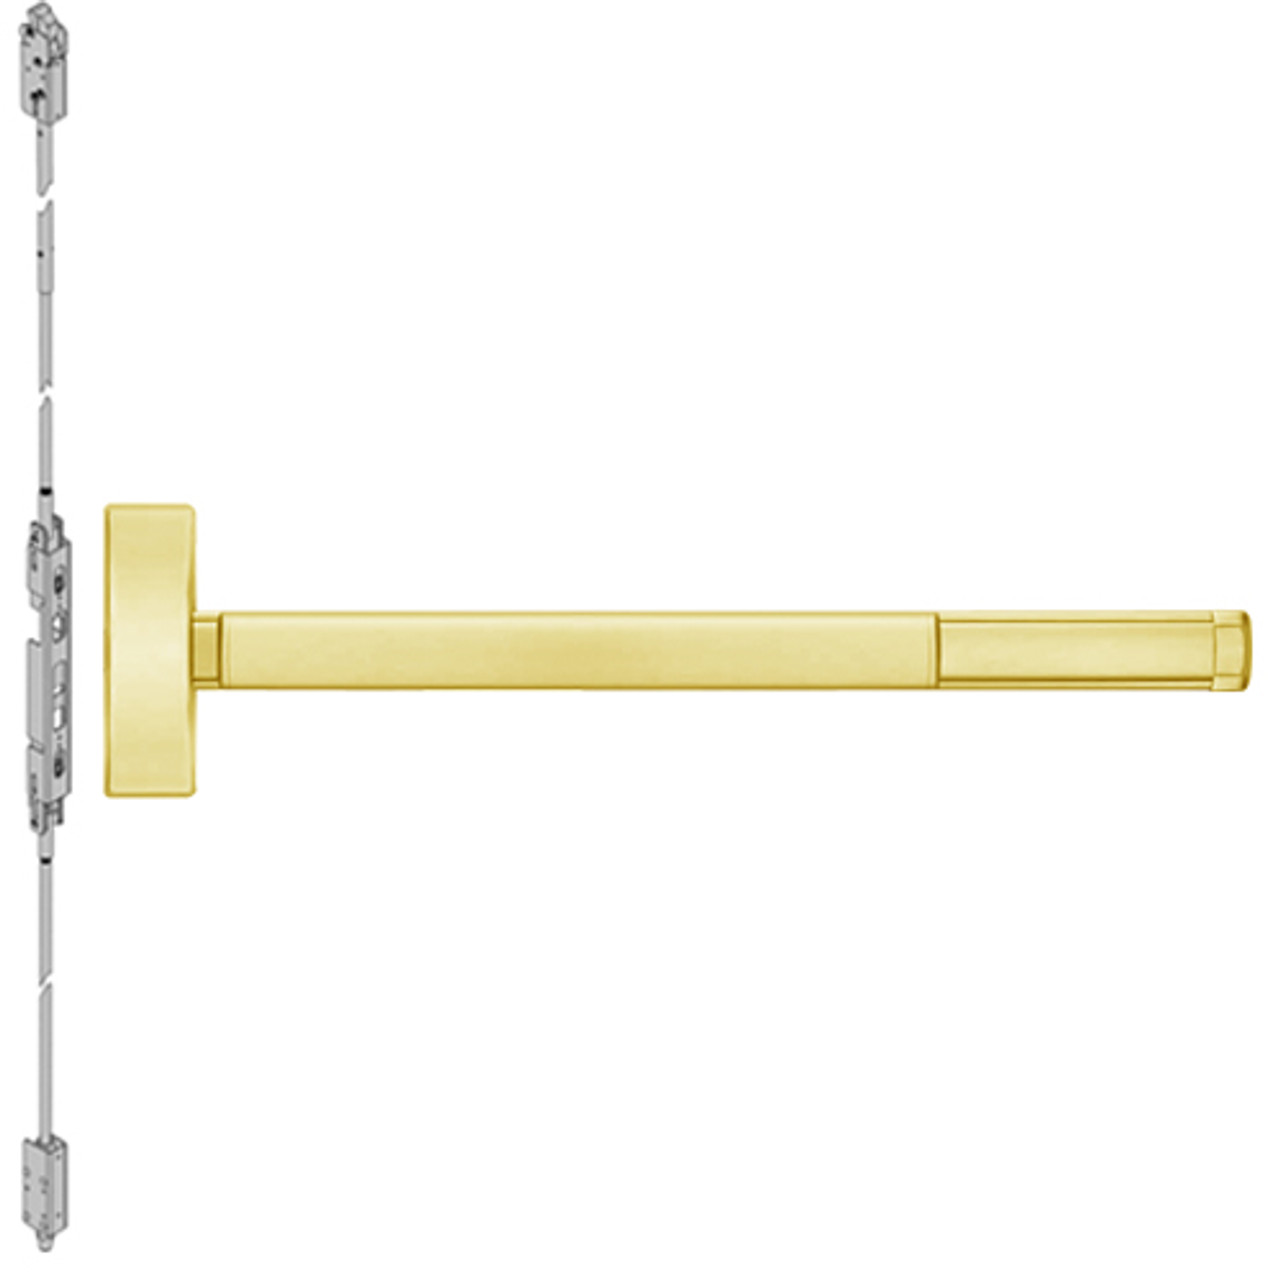 DEFL2815-605-48 PHI 2800 Series Fire Rated Concealed Vertical Rod Exit Device with Delayed Egress Prepped for Thumbpiece Always Active in Bright Brass Finish